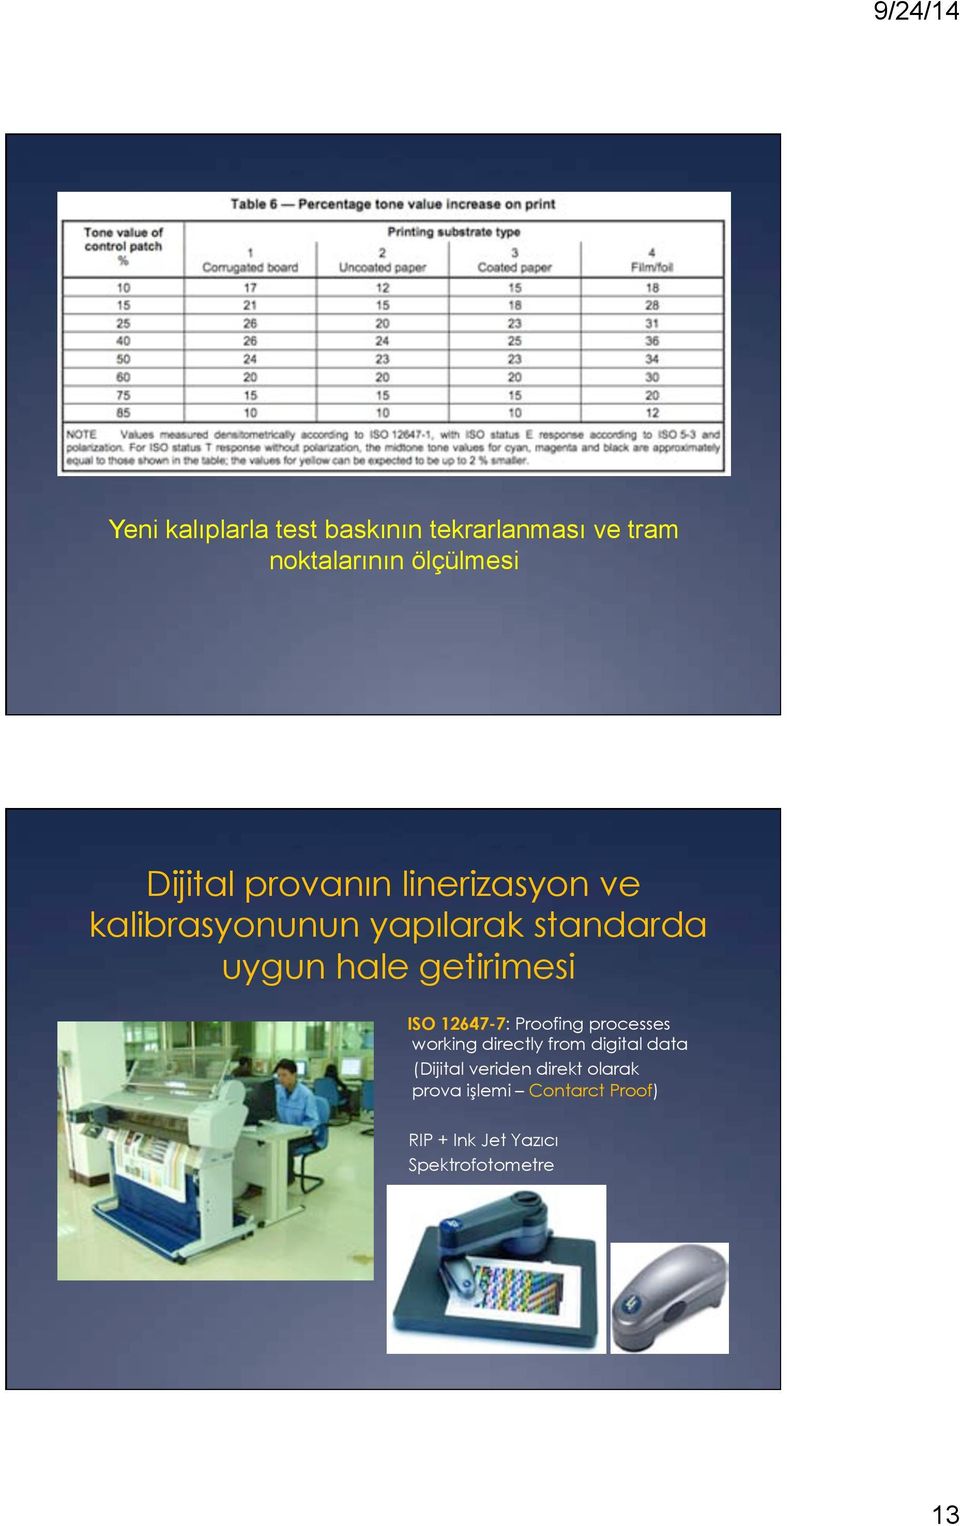 ISO 12647-7: Proofing processes working directly from digital data (Dijital veriden